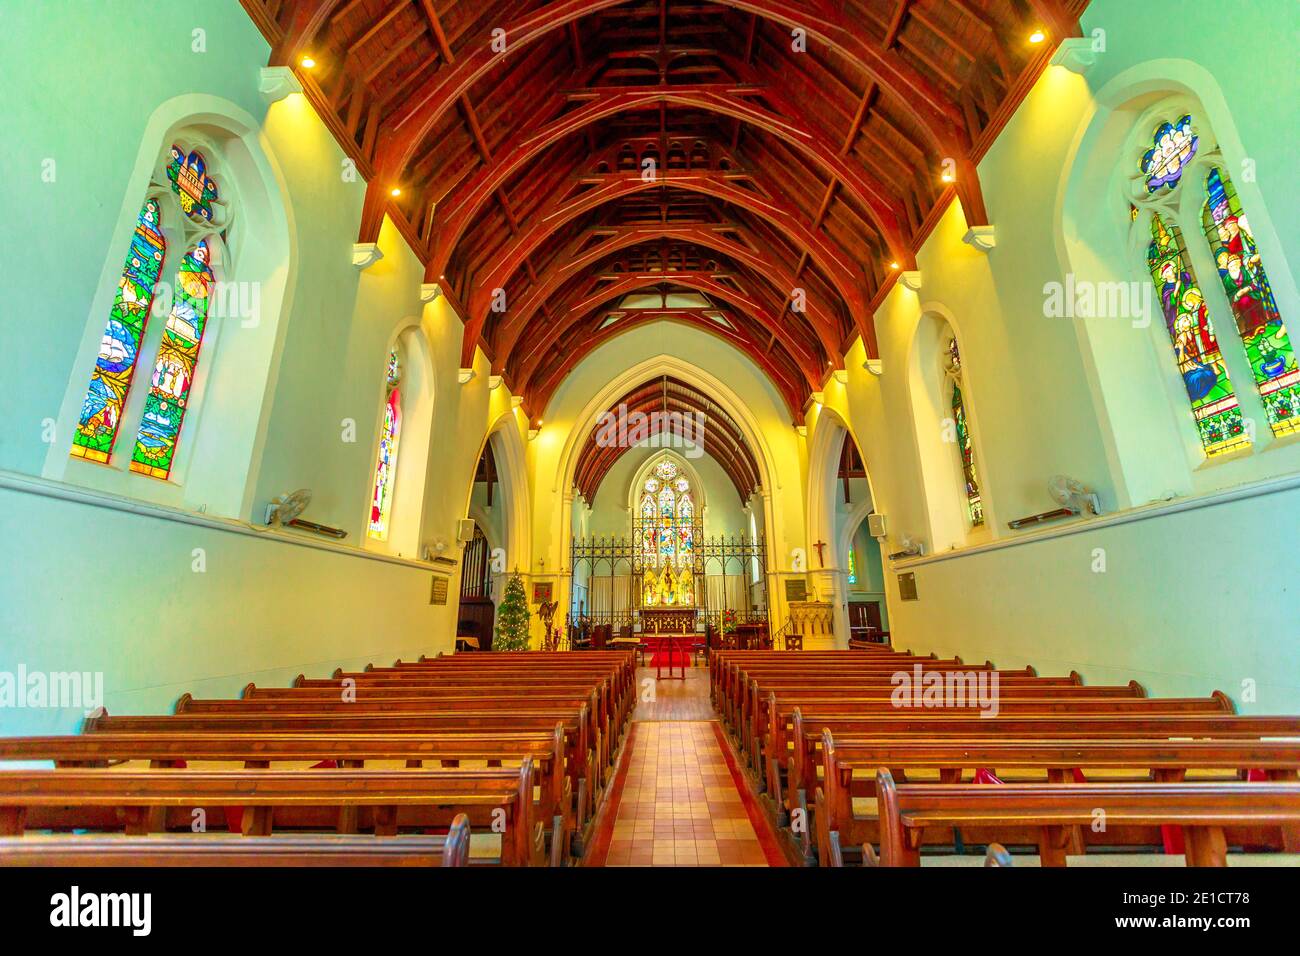 Fremantle, Western Australia - Jan 2, 2018: central nave interior of St John's Anglican Church or St John the Evangelist Church in High Street, is an Stock Photo